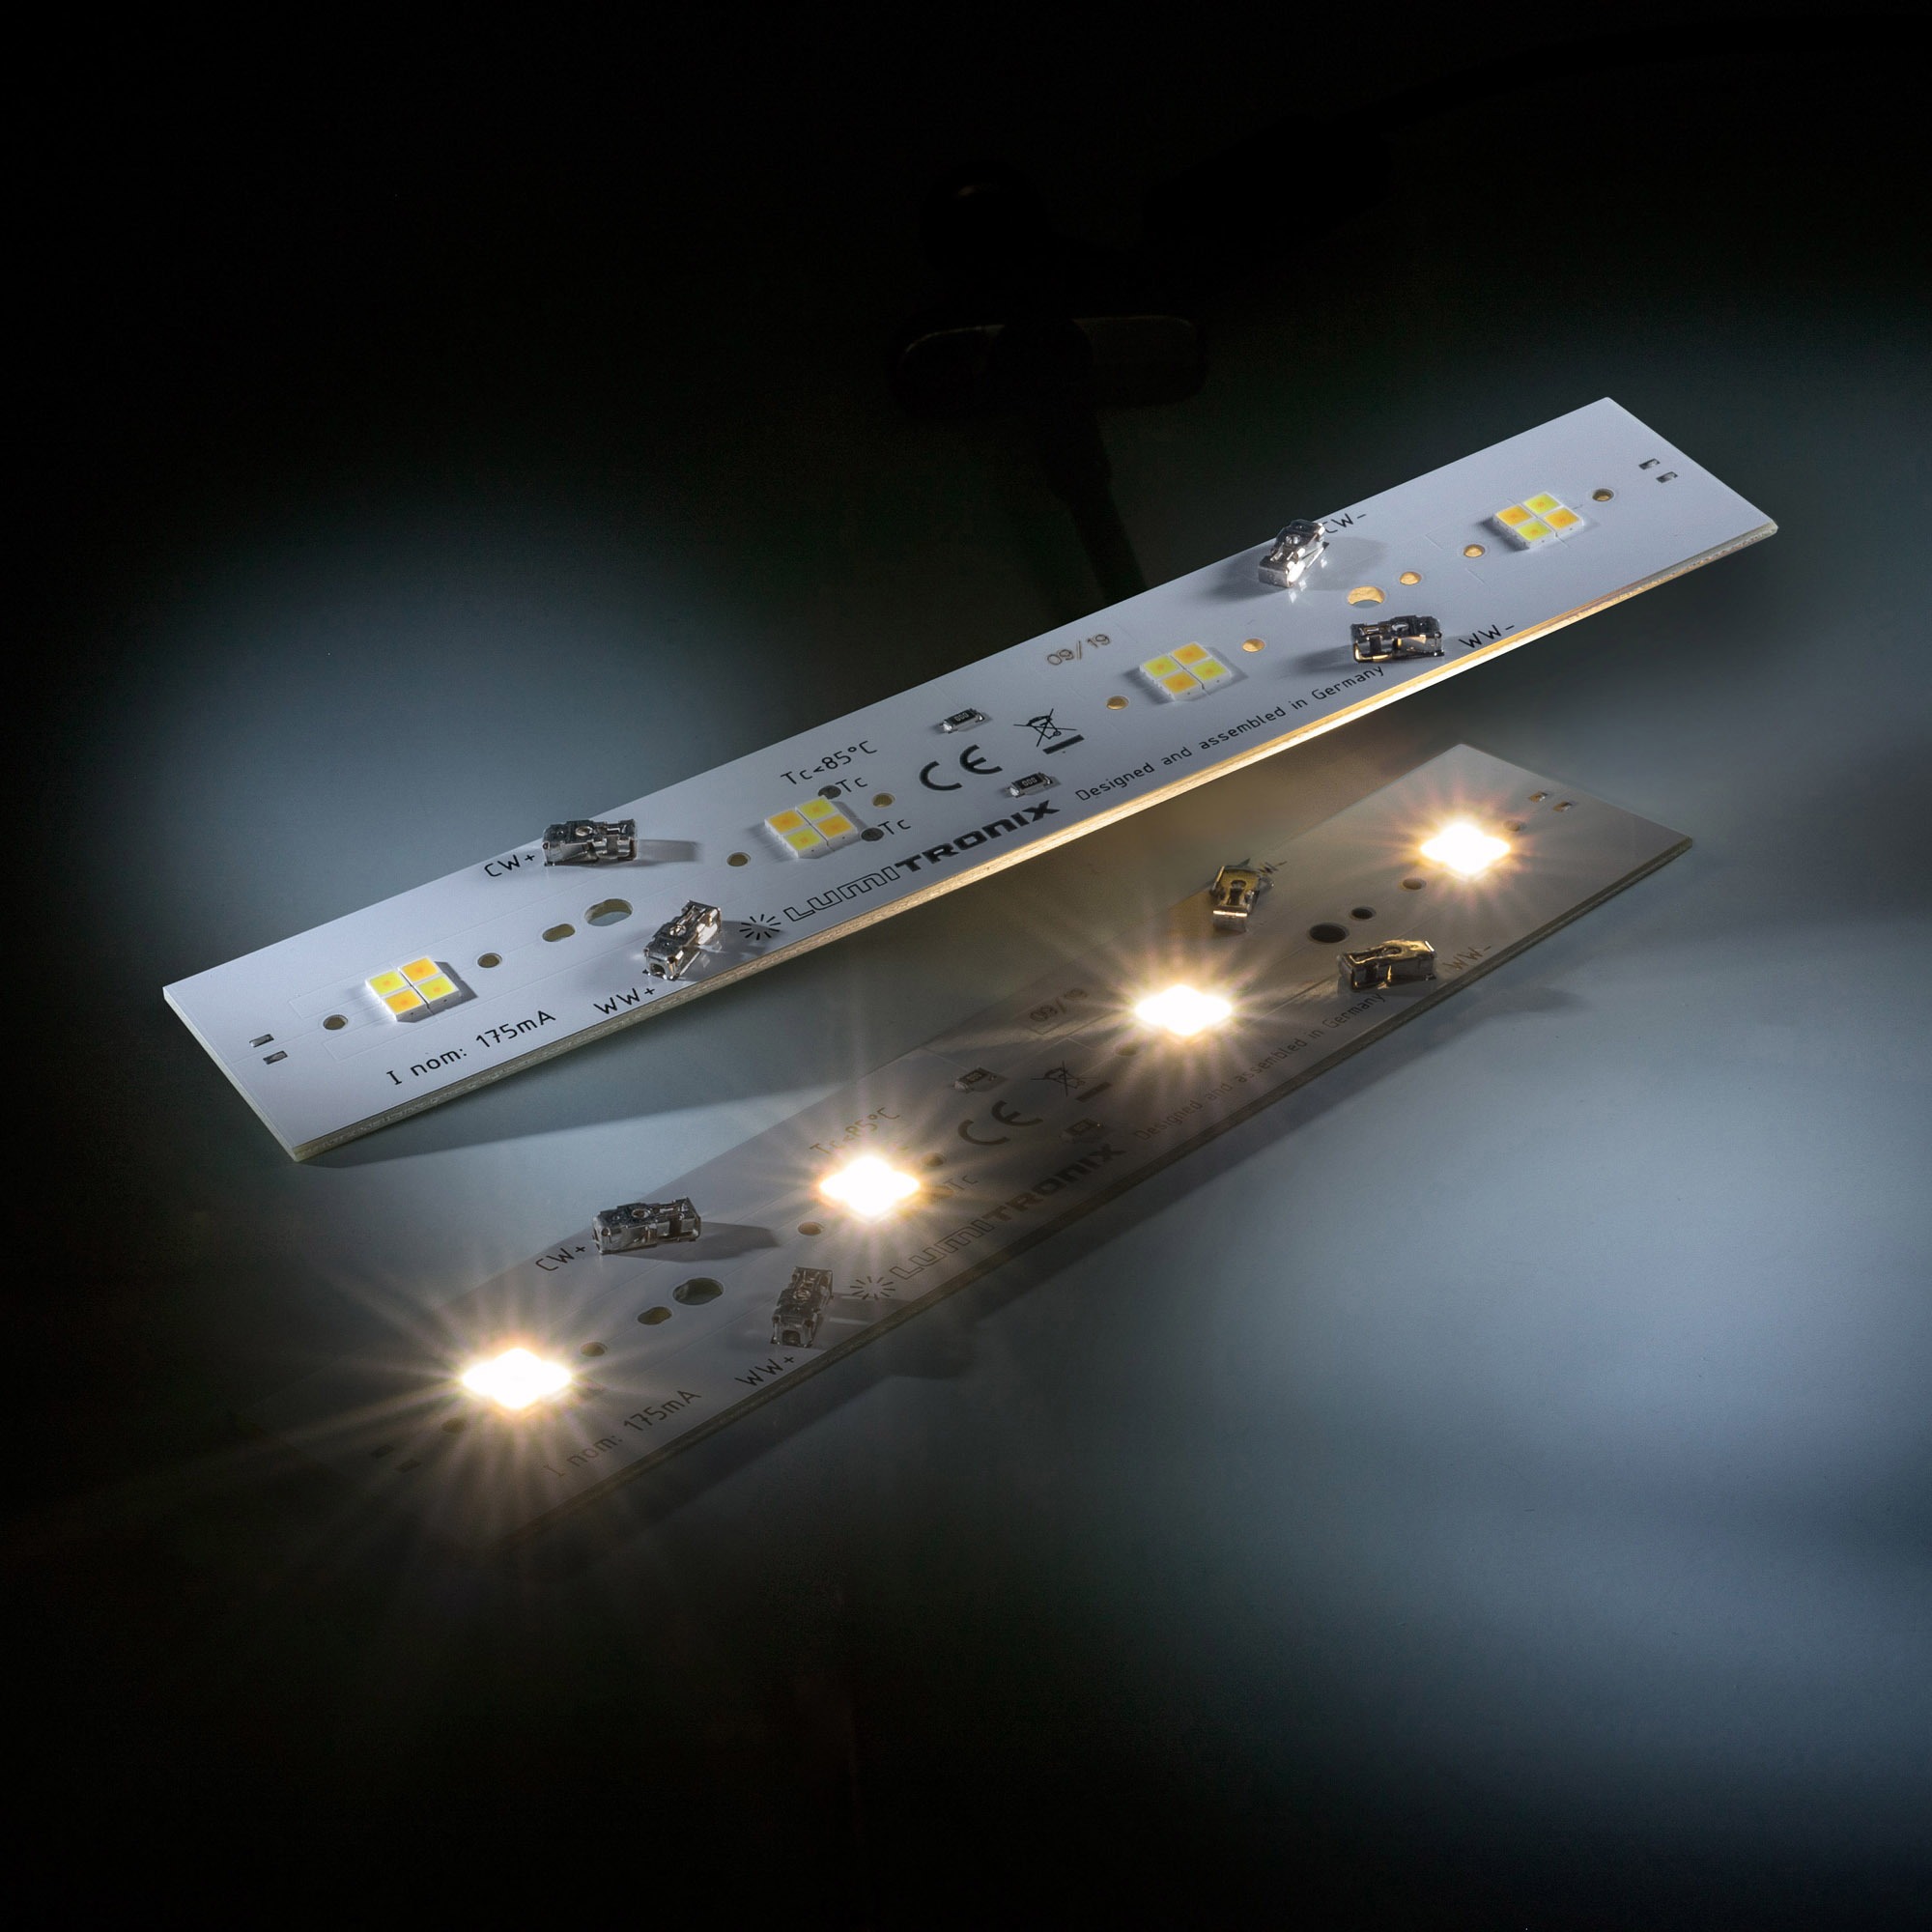 Daisy 16 Nichia LED Strip Tunable White 2700-4000K 360+340lm 175mA 11.5V 16 LEDs 16cm module (up to 1450lm/ft and 8W/ft)